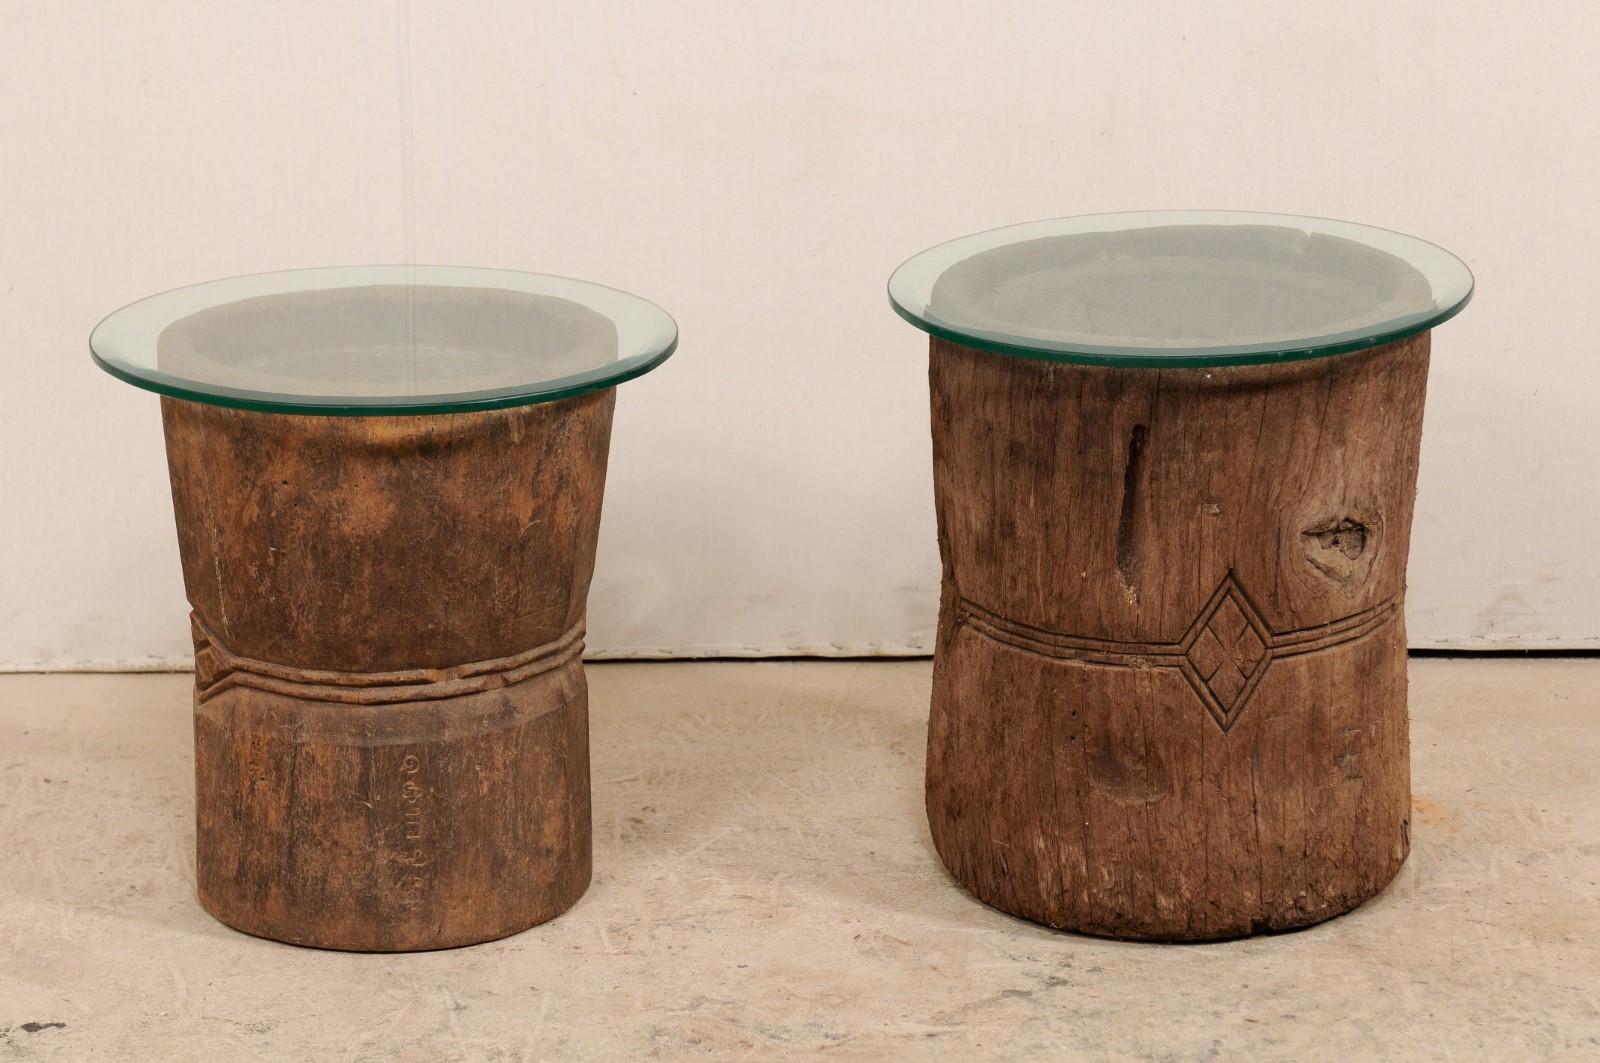 This is a beautiful pair of 19th century carved wooden mortar with glass top side tables. These unique pair of tables has been fashioned out of a pair of 19th century hand-carved wooden mortars from South Indian (Kerala), which have been topped with